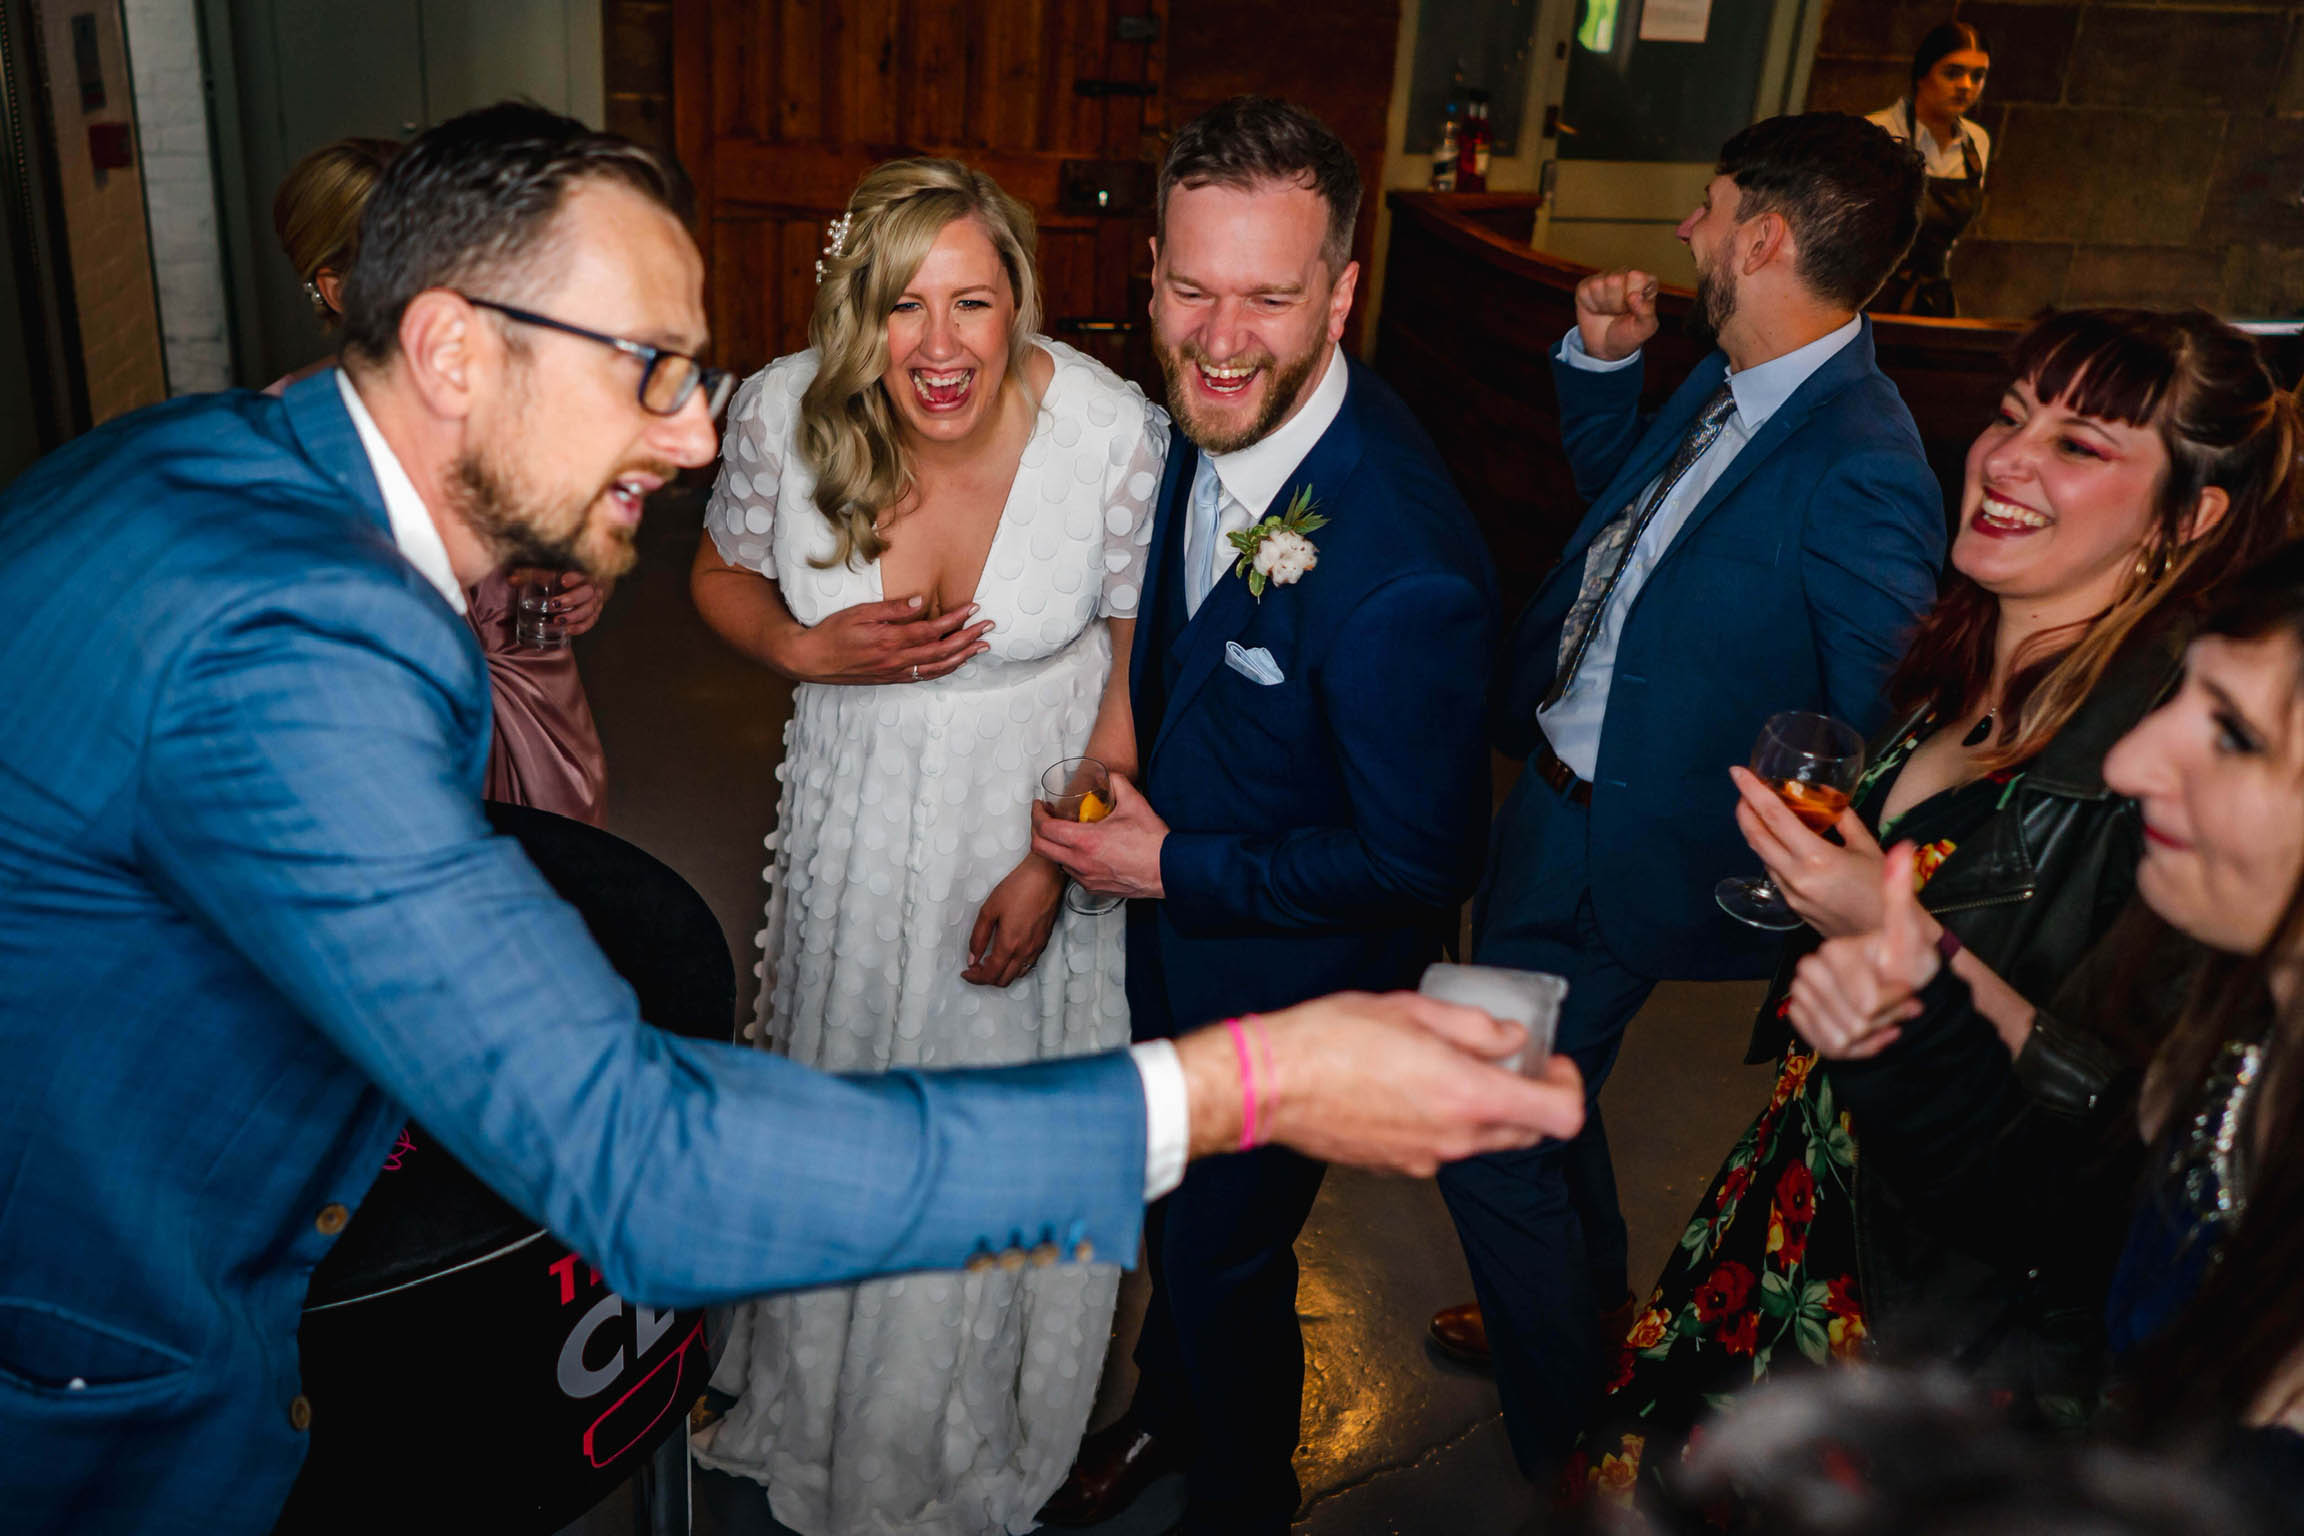 Amazement on the faces of a bride and groom with their guests watching the performance of UK wedding magician Close-Up Chris